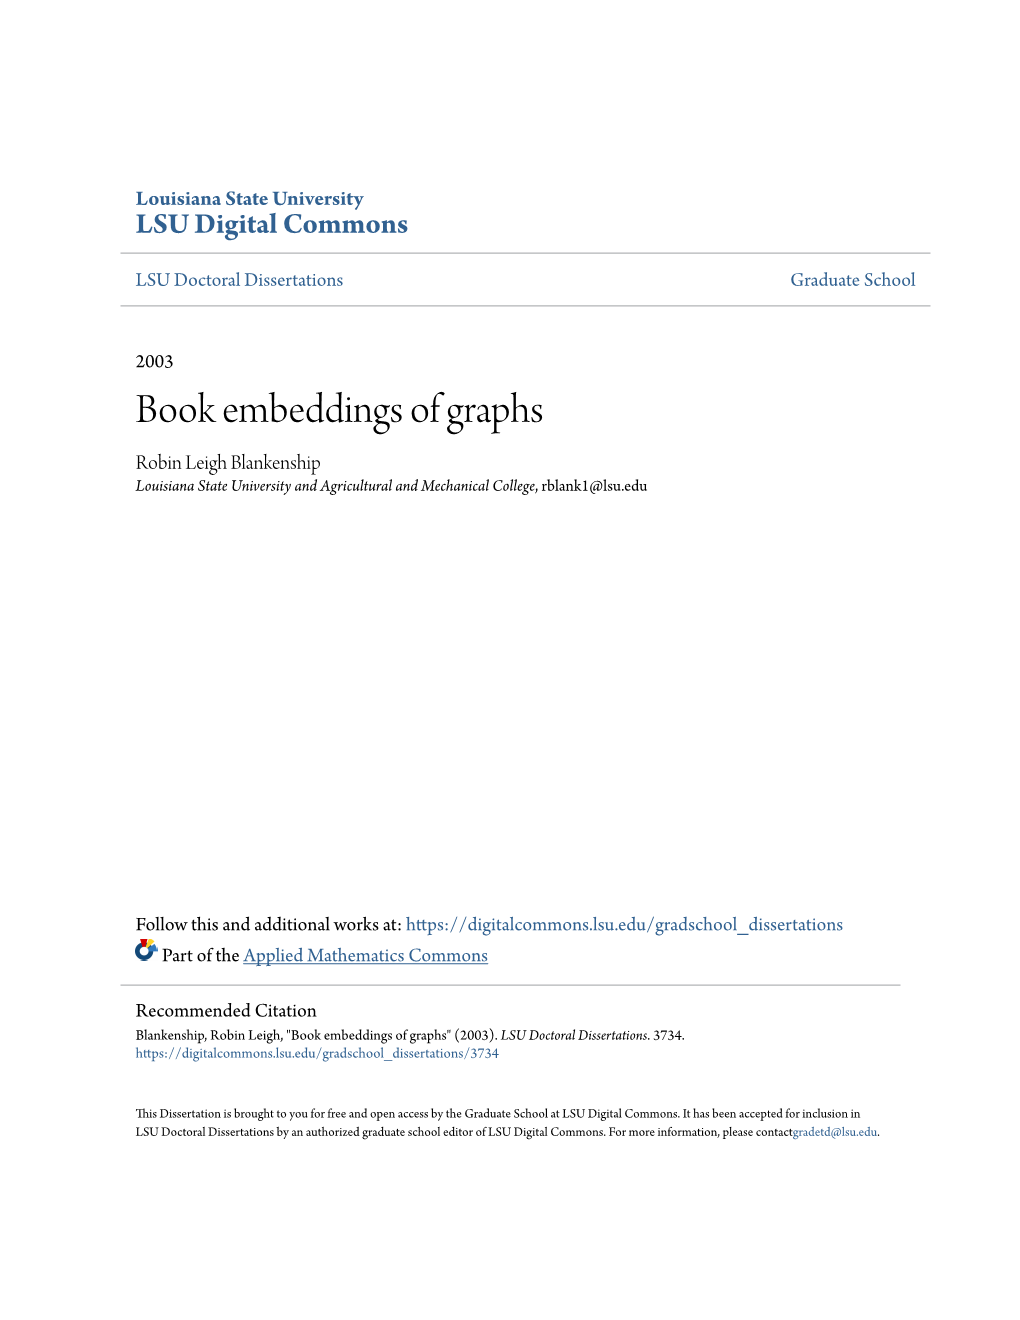 Book Embeddings of Graphs Robin Leigh Blankenship Louisiana State University and Agricultural and Mechanical College, Rblank1@Lsu.Edu